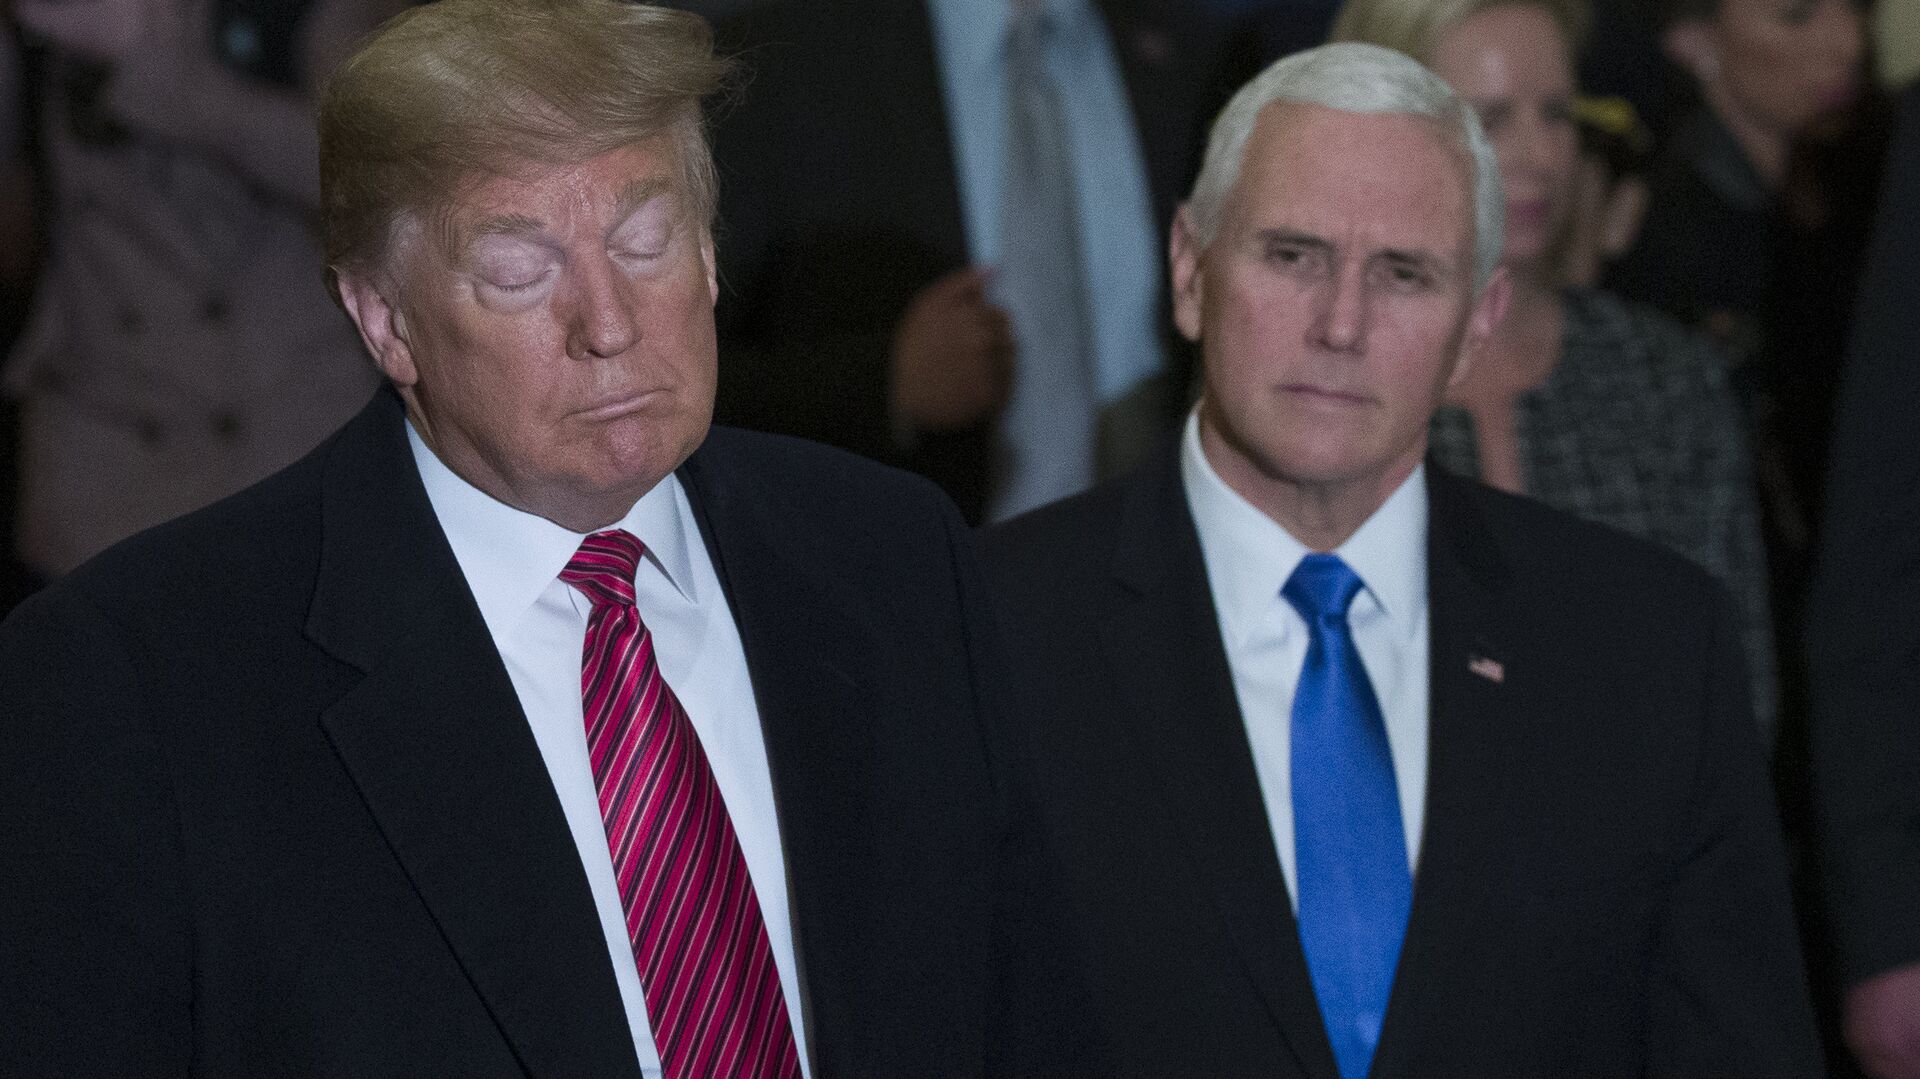 President Donald Trump gives his State of the Union address to a joint session of Congress, Tuesday, Feb. 5, 2019 at the Capitol in Washington, as Vice President Mike Pence, left, and House Speaker Nancy Pelosi look on.  - Sputnik International, 1920, 21.06.2022